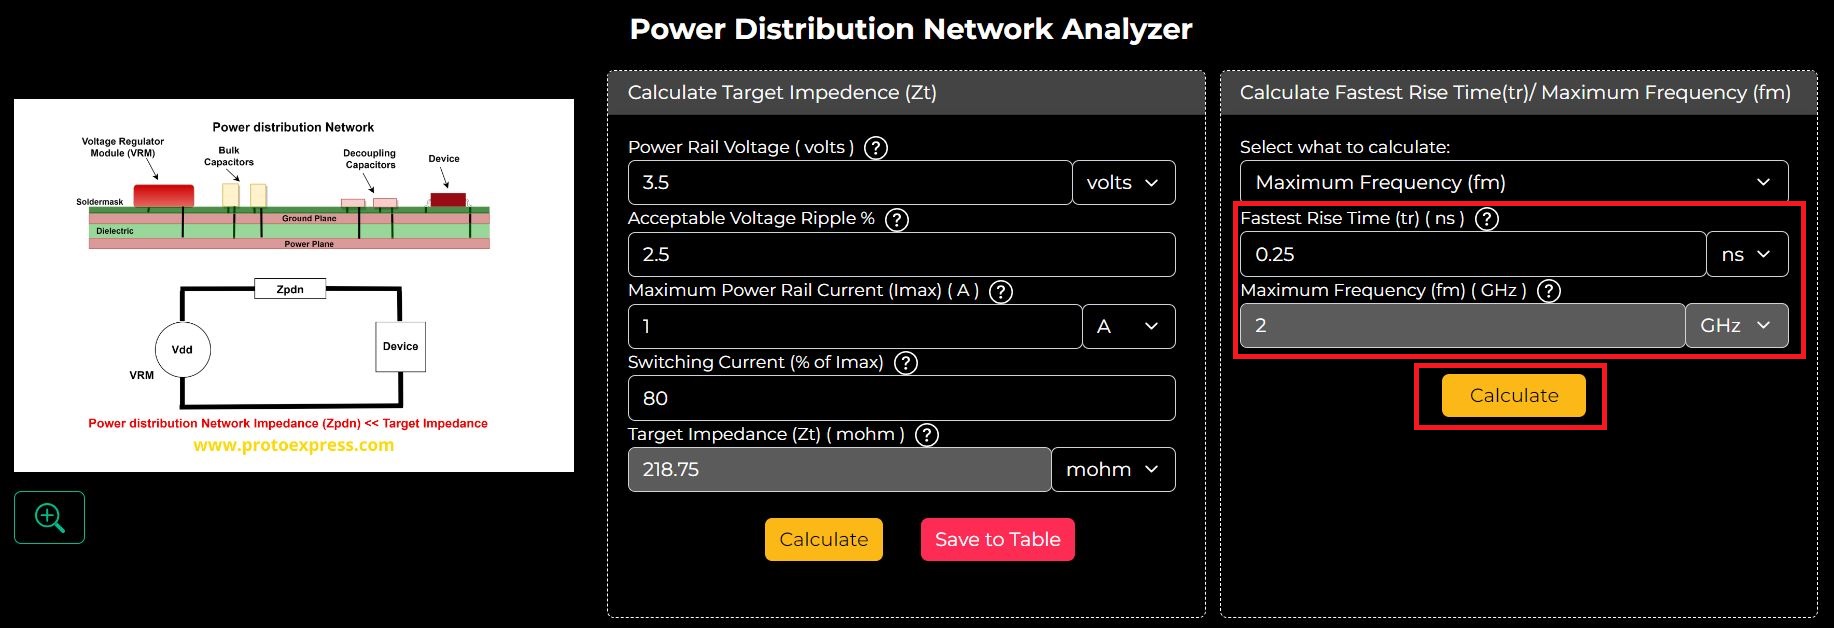 power-distribution-network-analyzer-fastest-rise-time-based-on-maxium-frequency.jpg